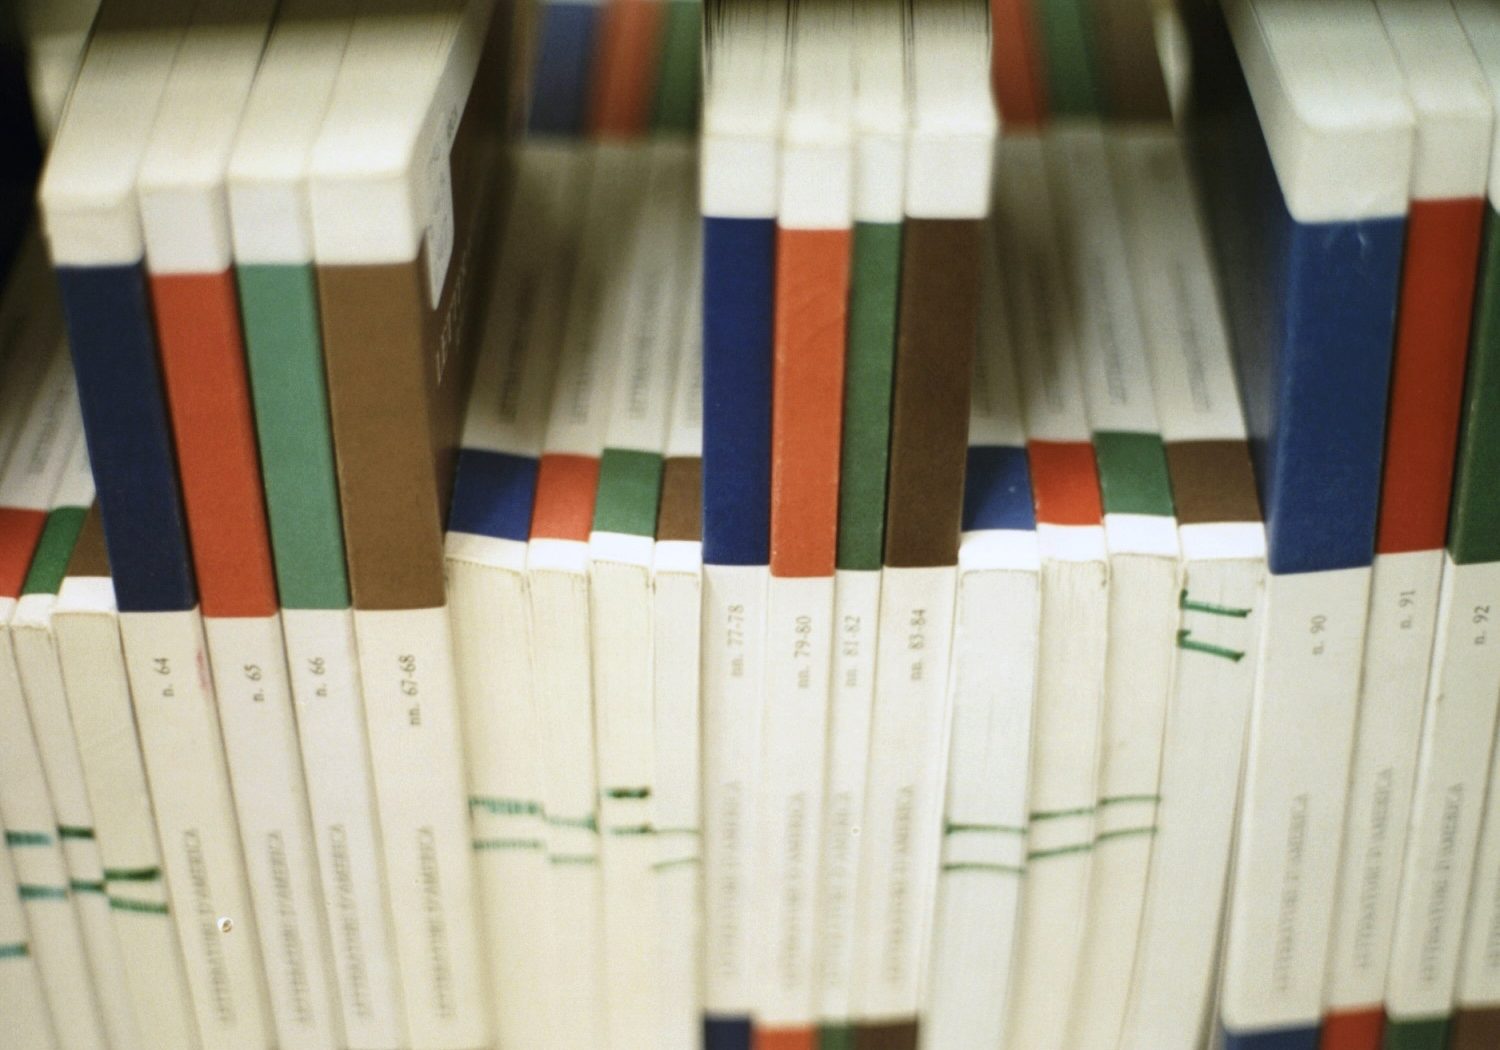 Image of a shelf of academic journals